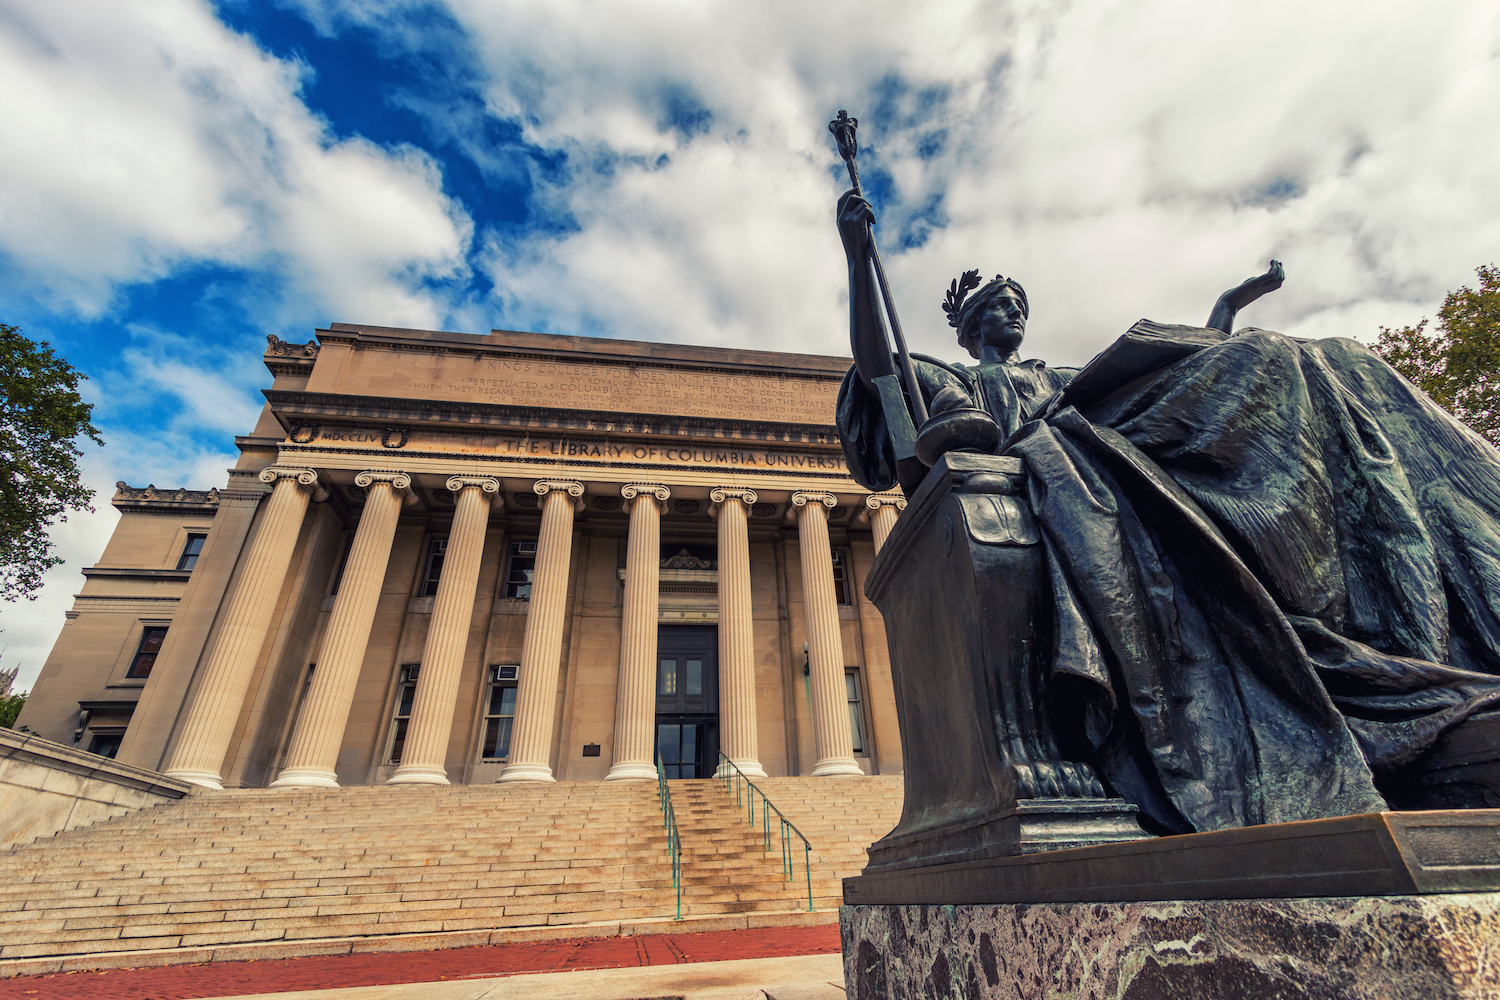 COLUMBIA UNIVERSITY AND IBM LAUNCHED 2 ACCELERATORS FOR BLOCKCHAIN STARTUPS